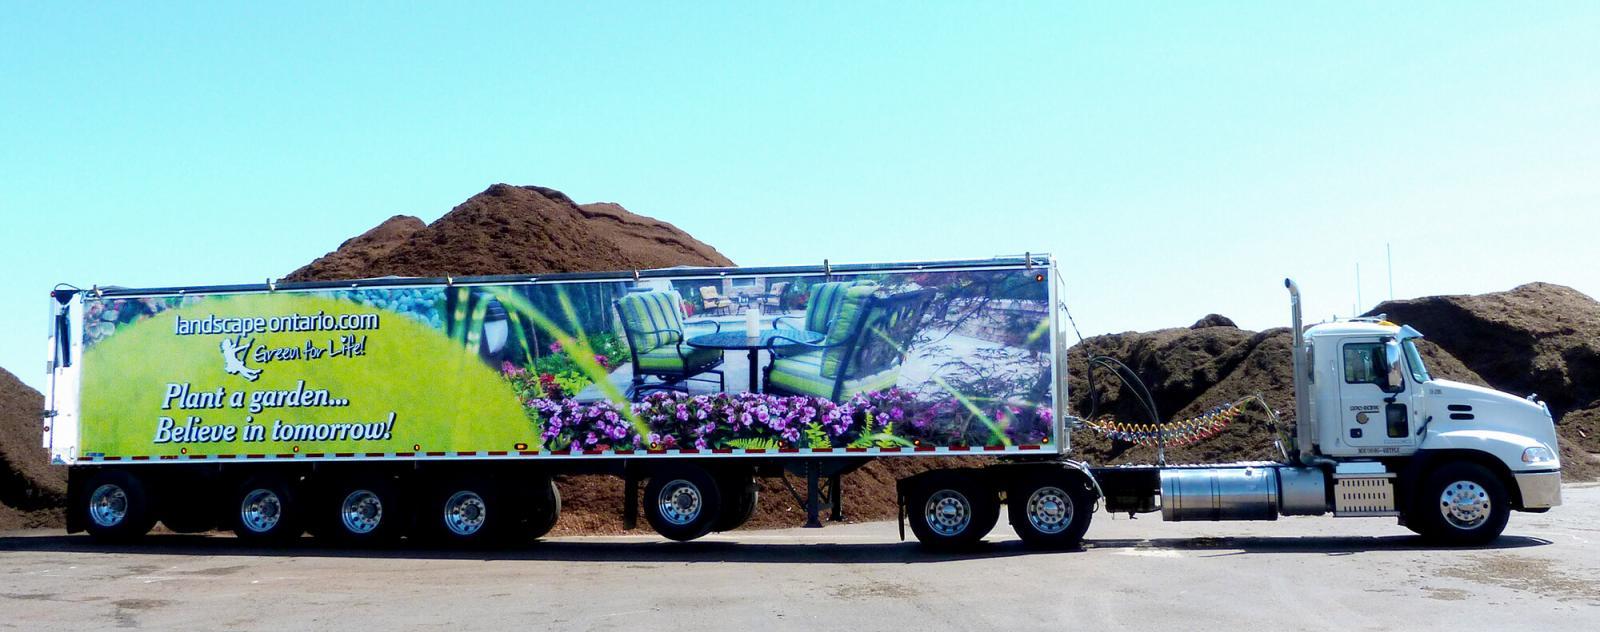 Gro-Bark shows its strong support for Landscape Ontario’s Green for Life branding with this transport trailer rolling along Ontario highways.